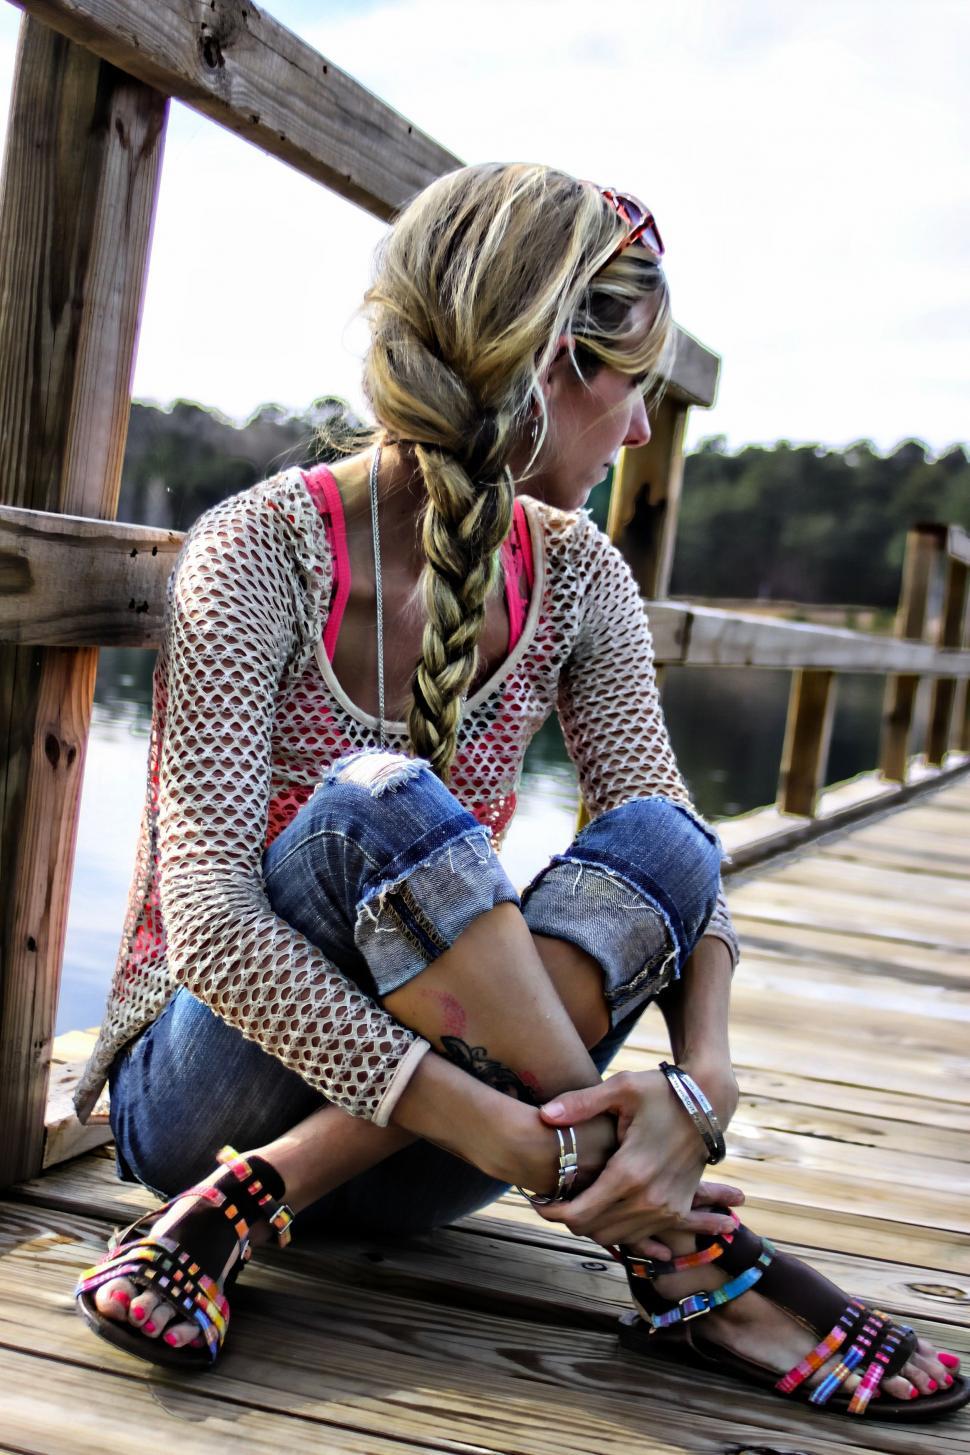 Free Image of Woman with braided hair on wooden pier  